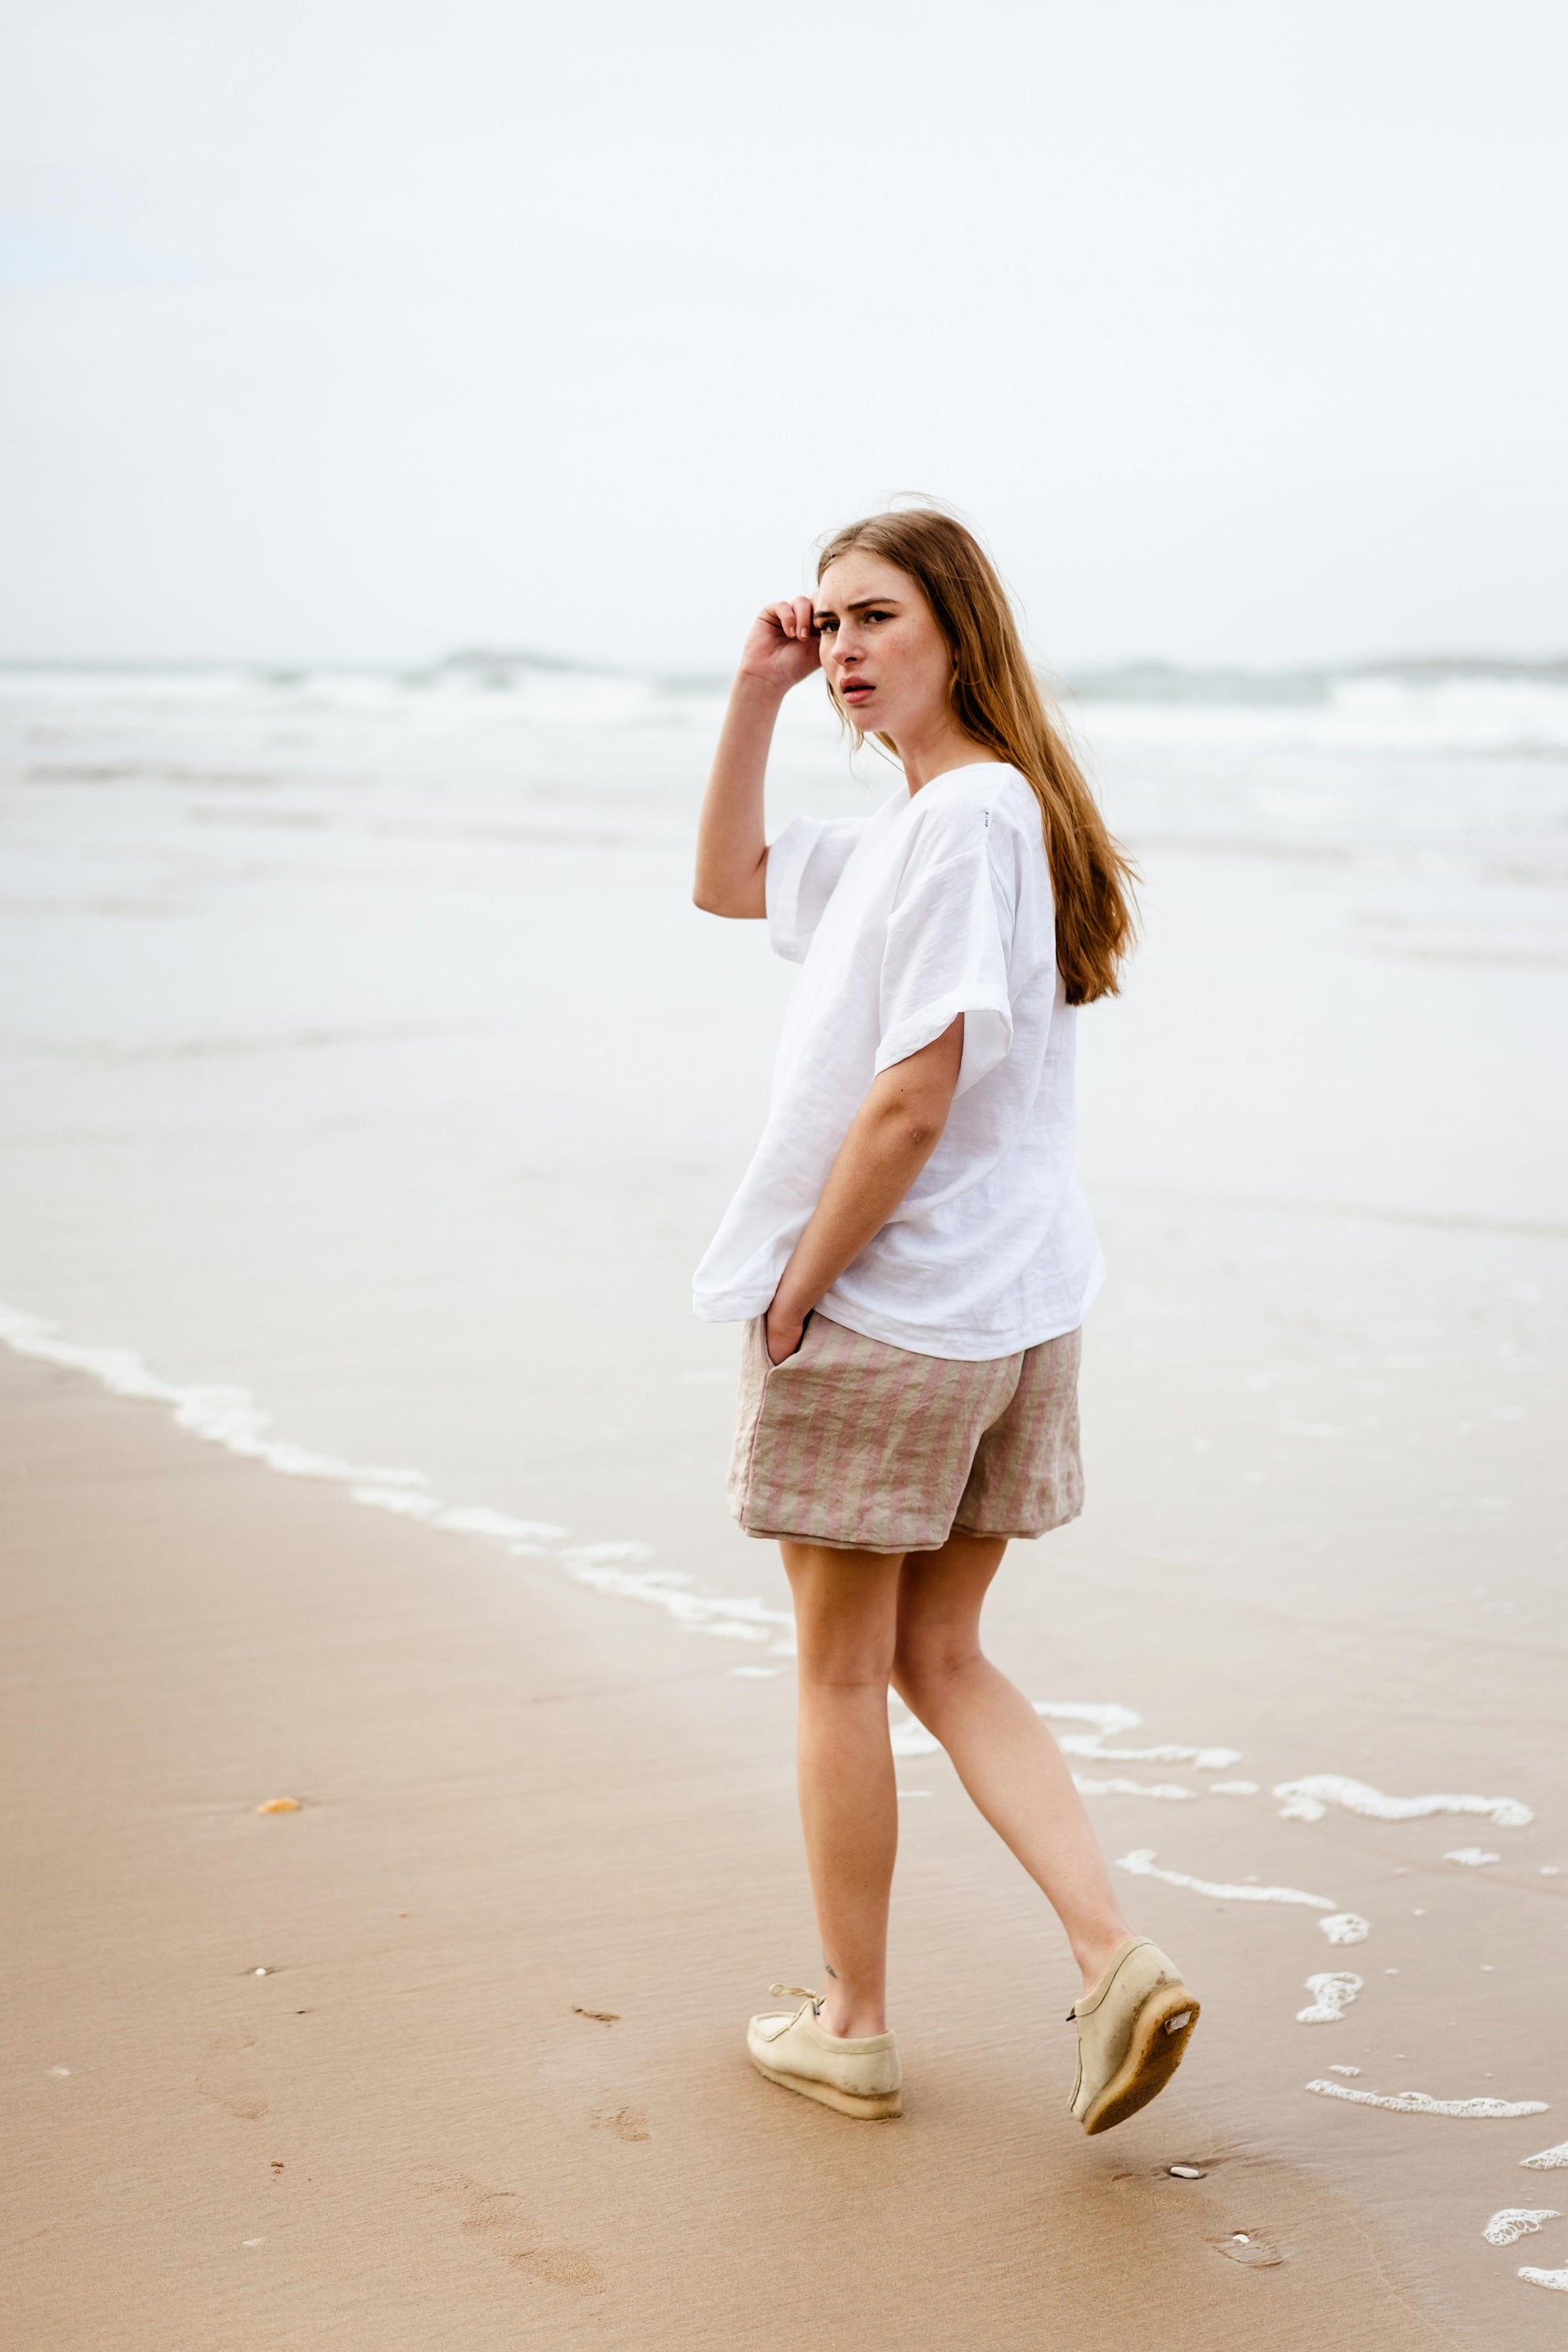 MULBERRY SHORTS | Our Mulberry shorts are a fun Summer wardrobe staple With an elasticated waist, they are easy to throw on and can be worn pulled up to waist, or worn on hips for a longer length. The shorts have side seam pockets and a double hem. Made w